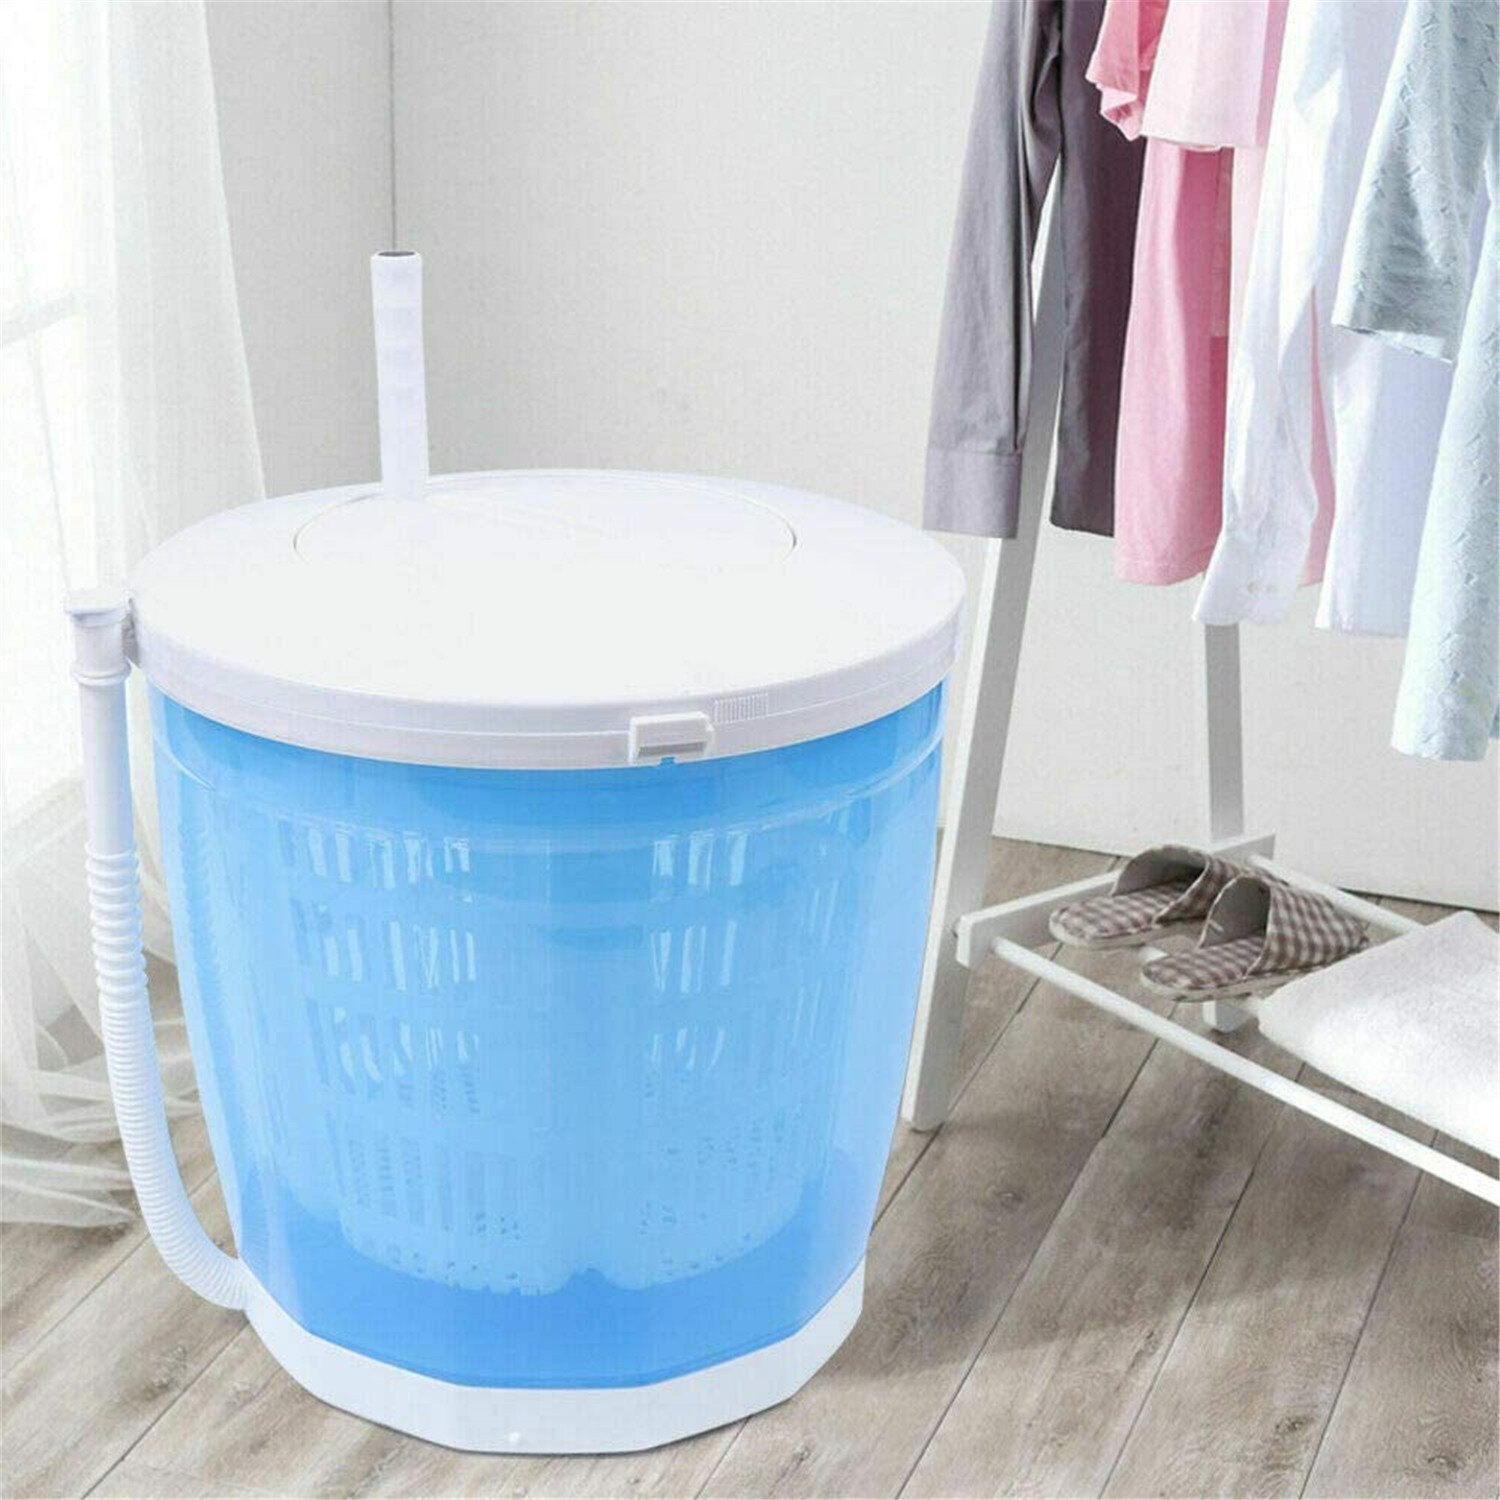 Large Portable Washing Machine with Dryer Bucket for Clothes Shoe